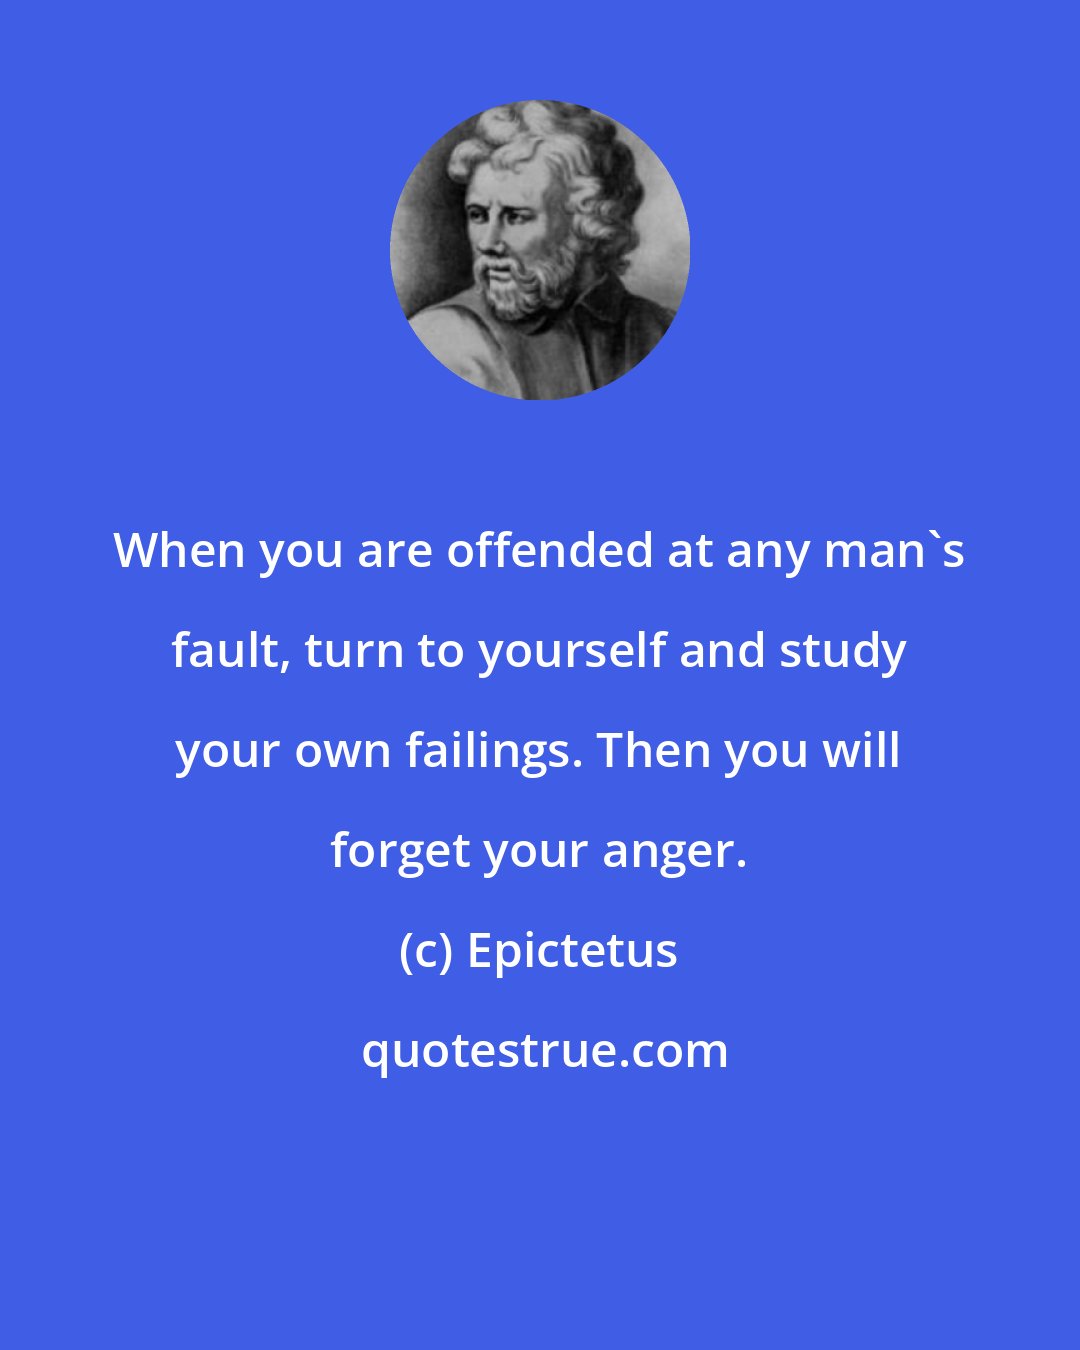 Epictetus: When you are offended at any man's fault, turn to yourself and study your own failings. Then you will forget your anger.